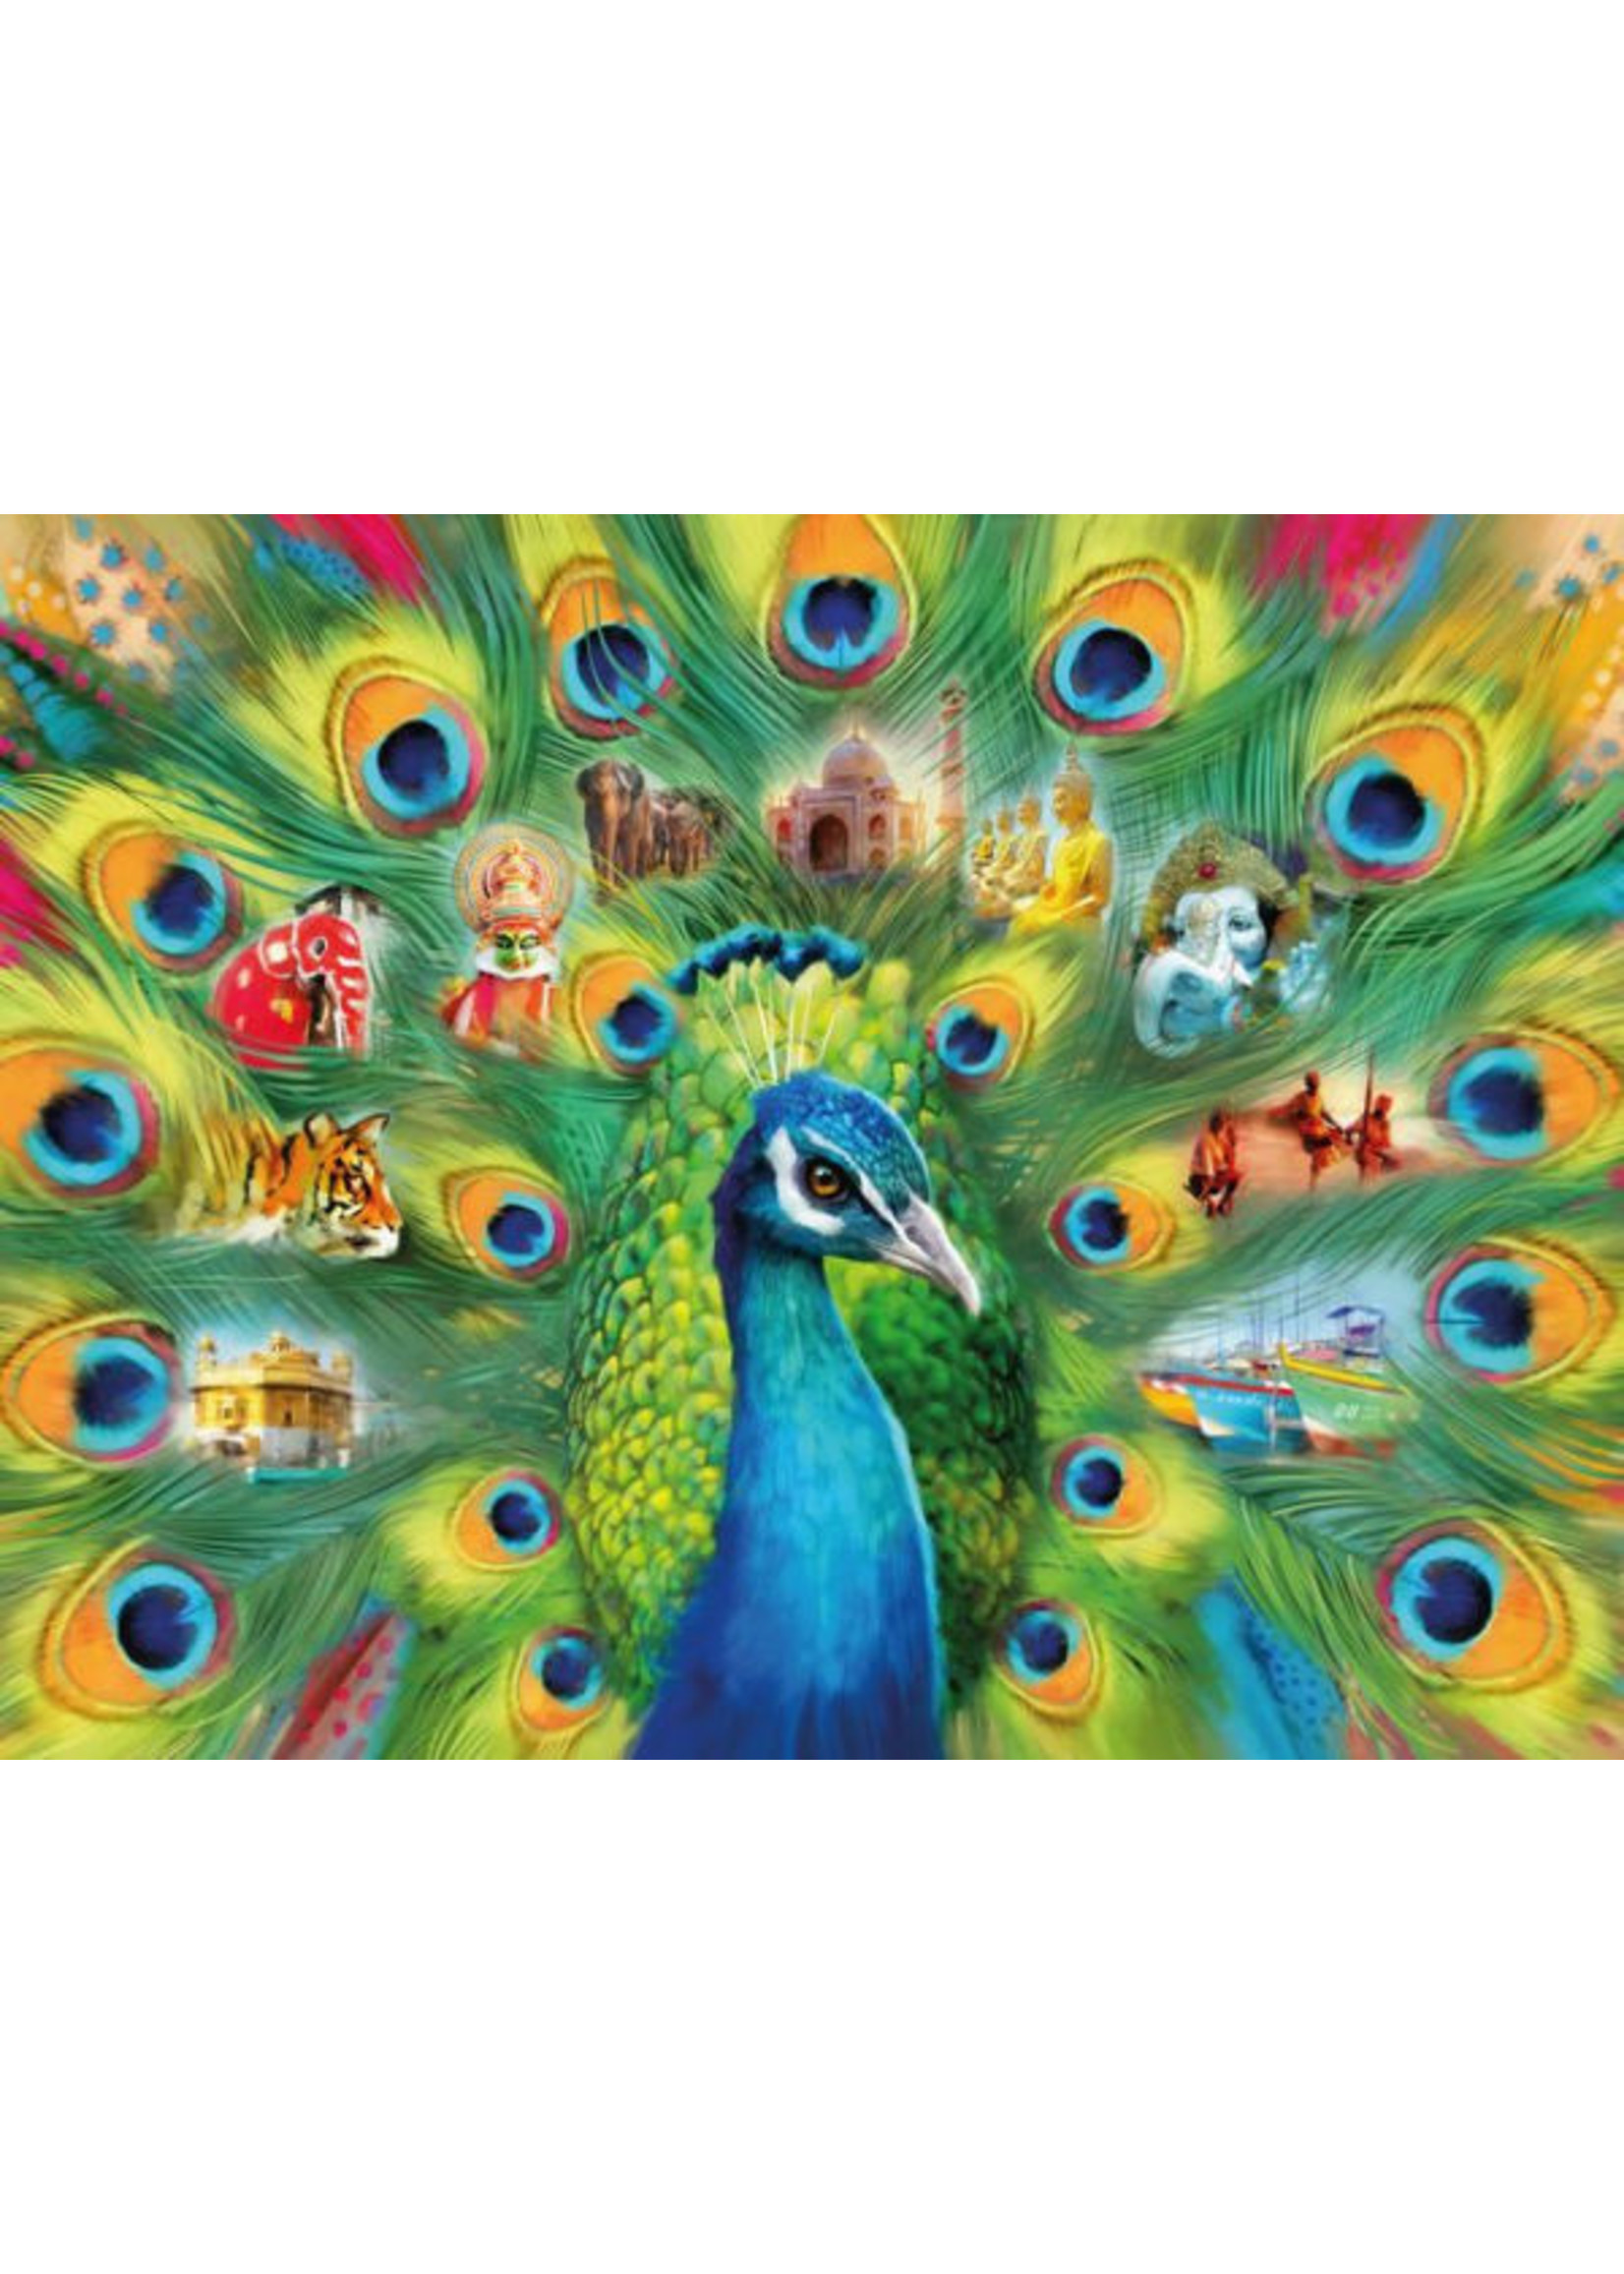 Ravensburger Land of the Peacock - 2000 Piece Puzzle